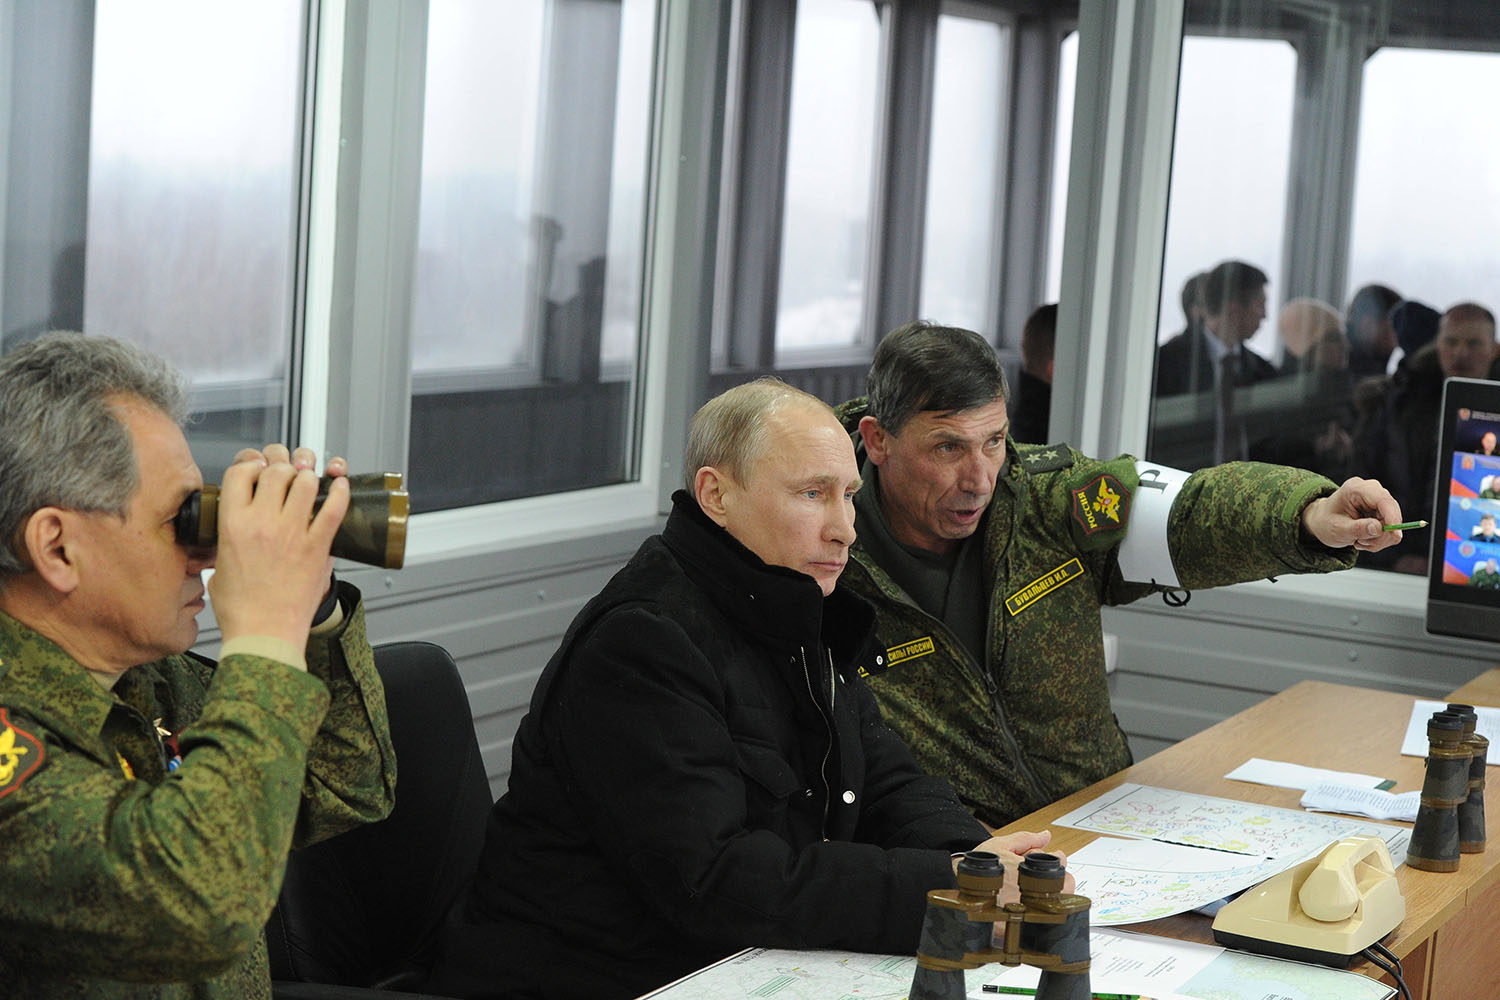 Mar. 3, 2014. Russia's defence minister Sergei Shoigu, president Vladimir Putin, and commander of the Russian Western Military District Troops Anatoly Sidorov (L-R) watch military exercises at the Kirillovsky training ground.